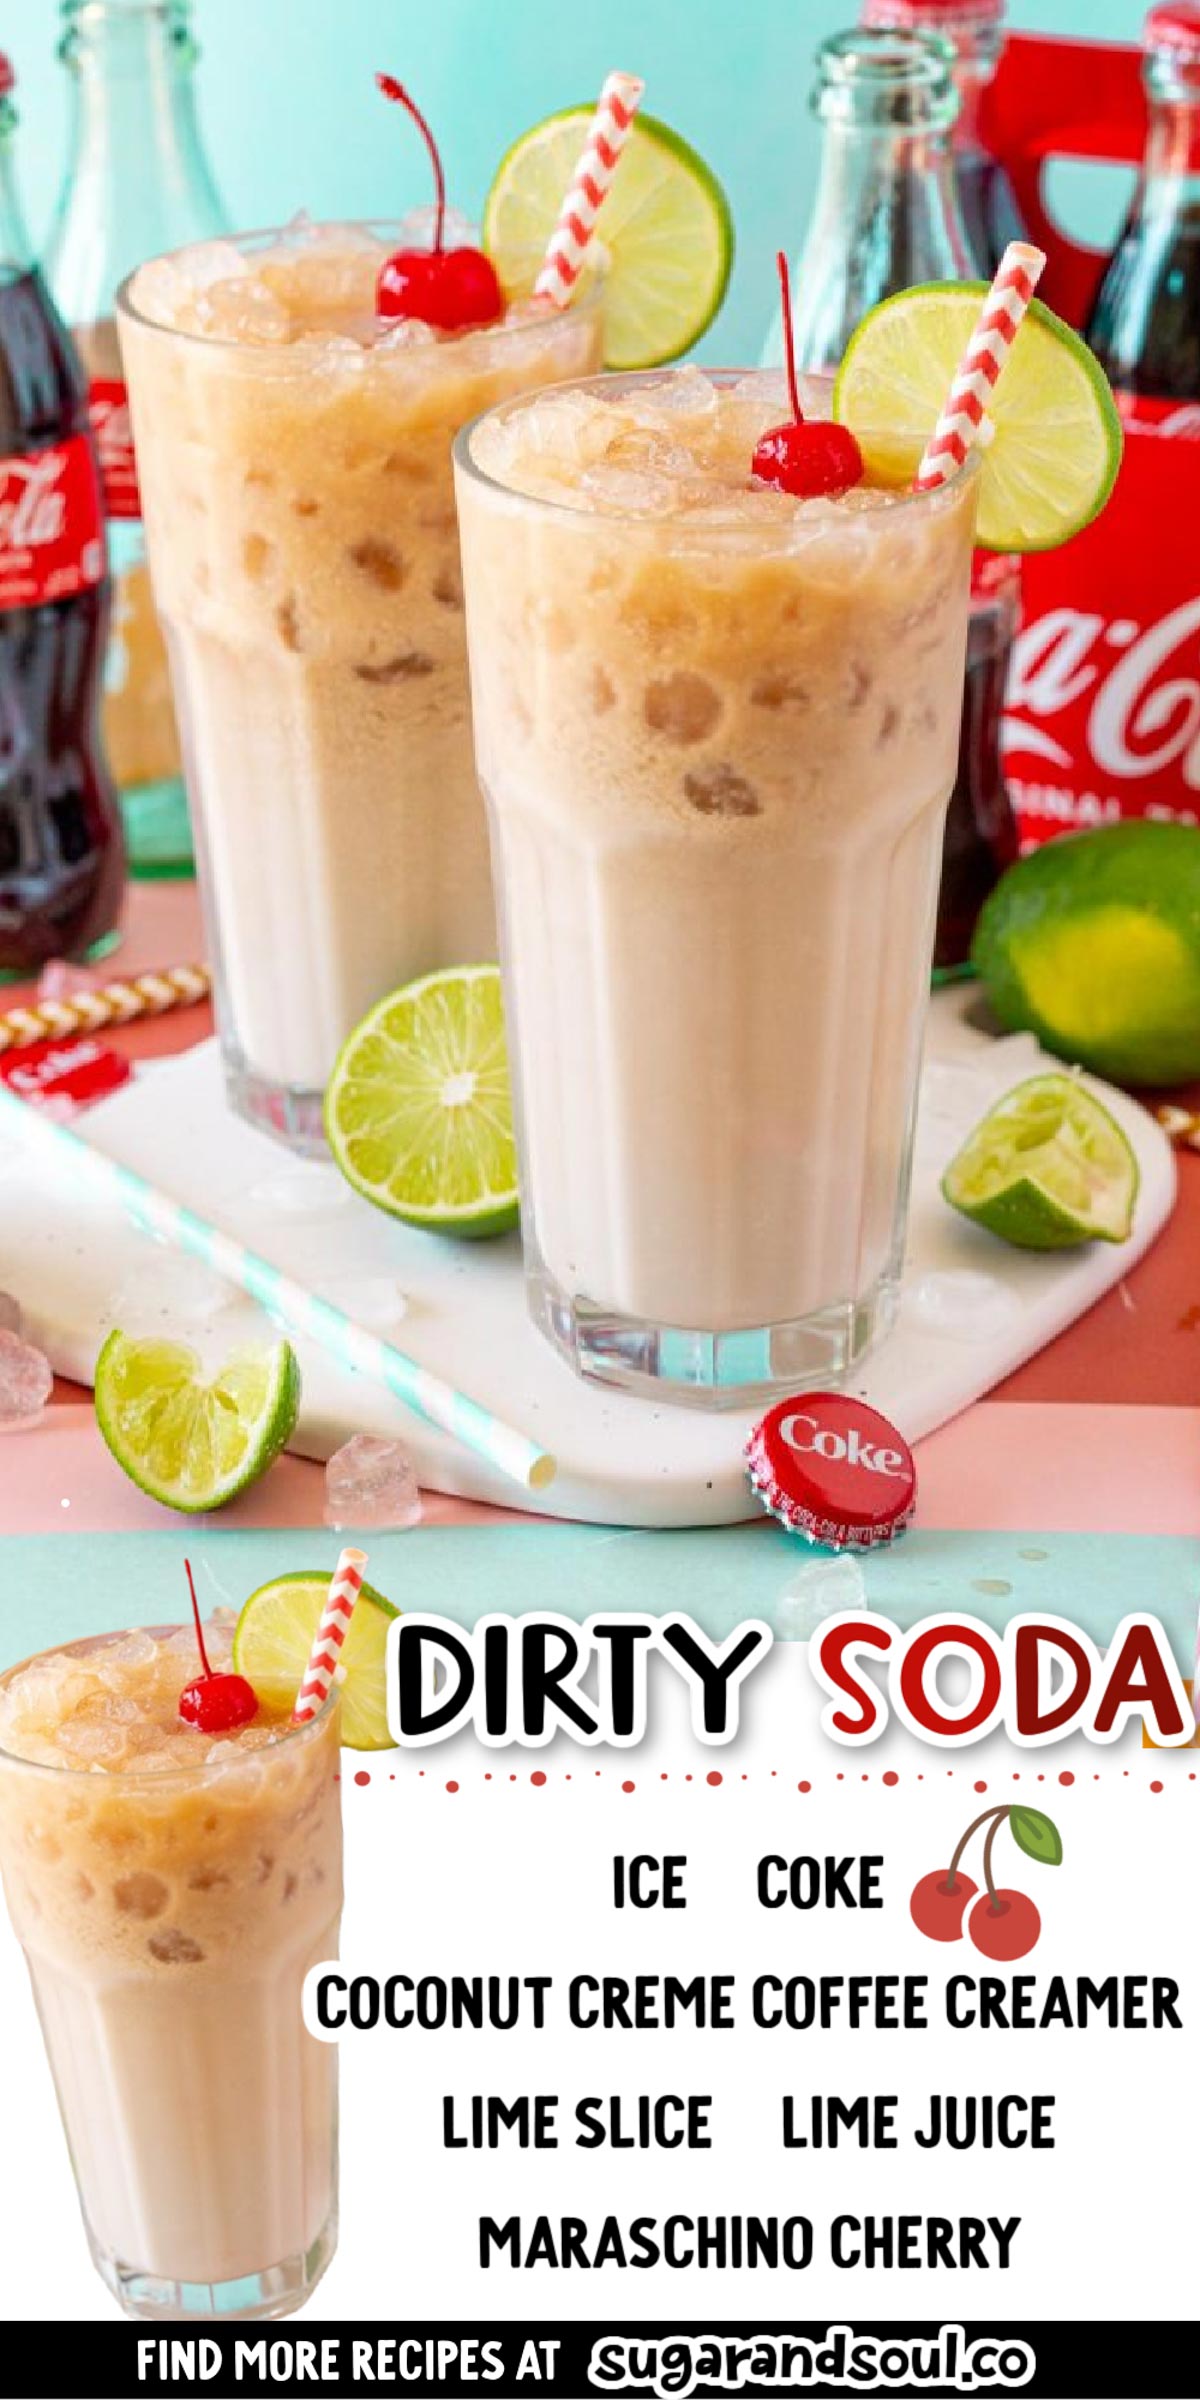 Dirty Soda made with Coke, coconut creamer, and lime juice is a deliciously indulgent soda shoppe style drink served over ice and perfect for sipping on a hot summer day or as a dessert treat! via @sugarandsoulco